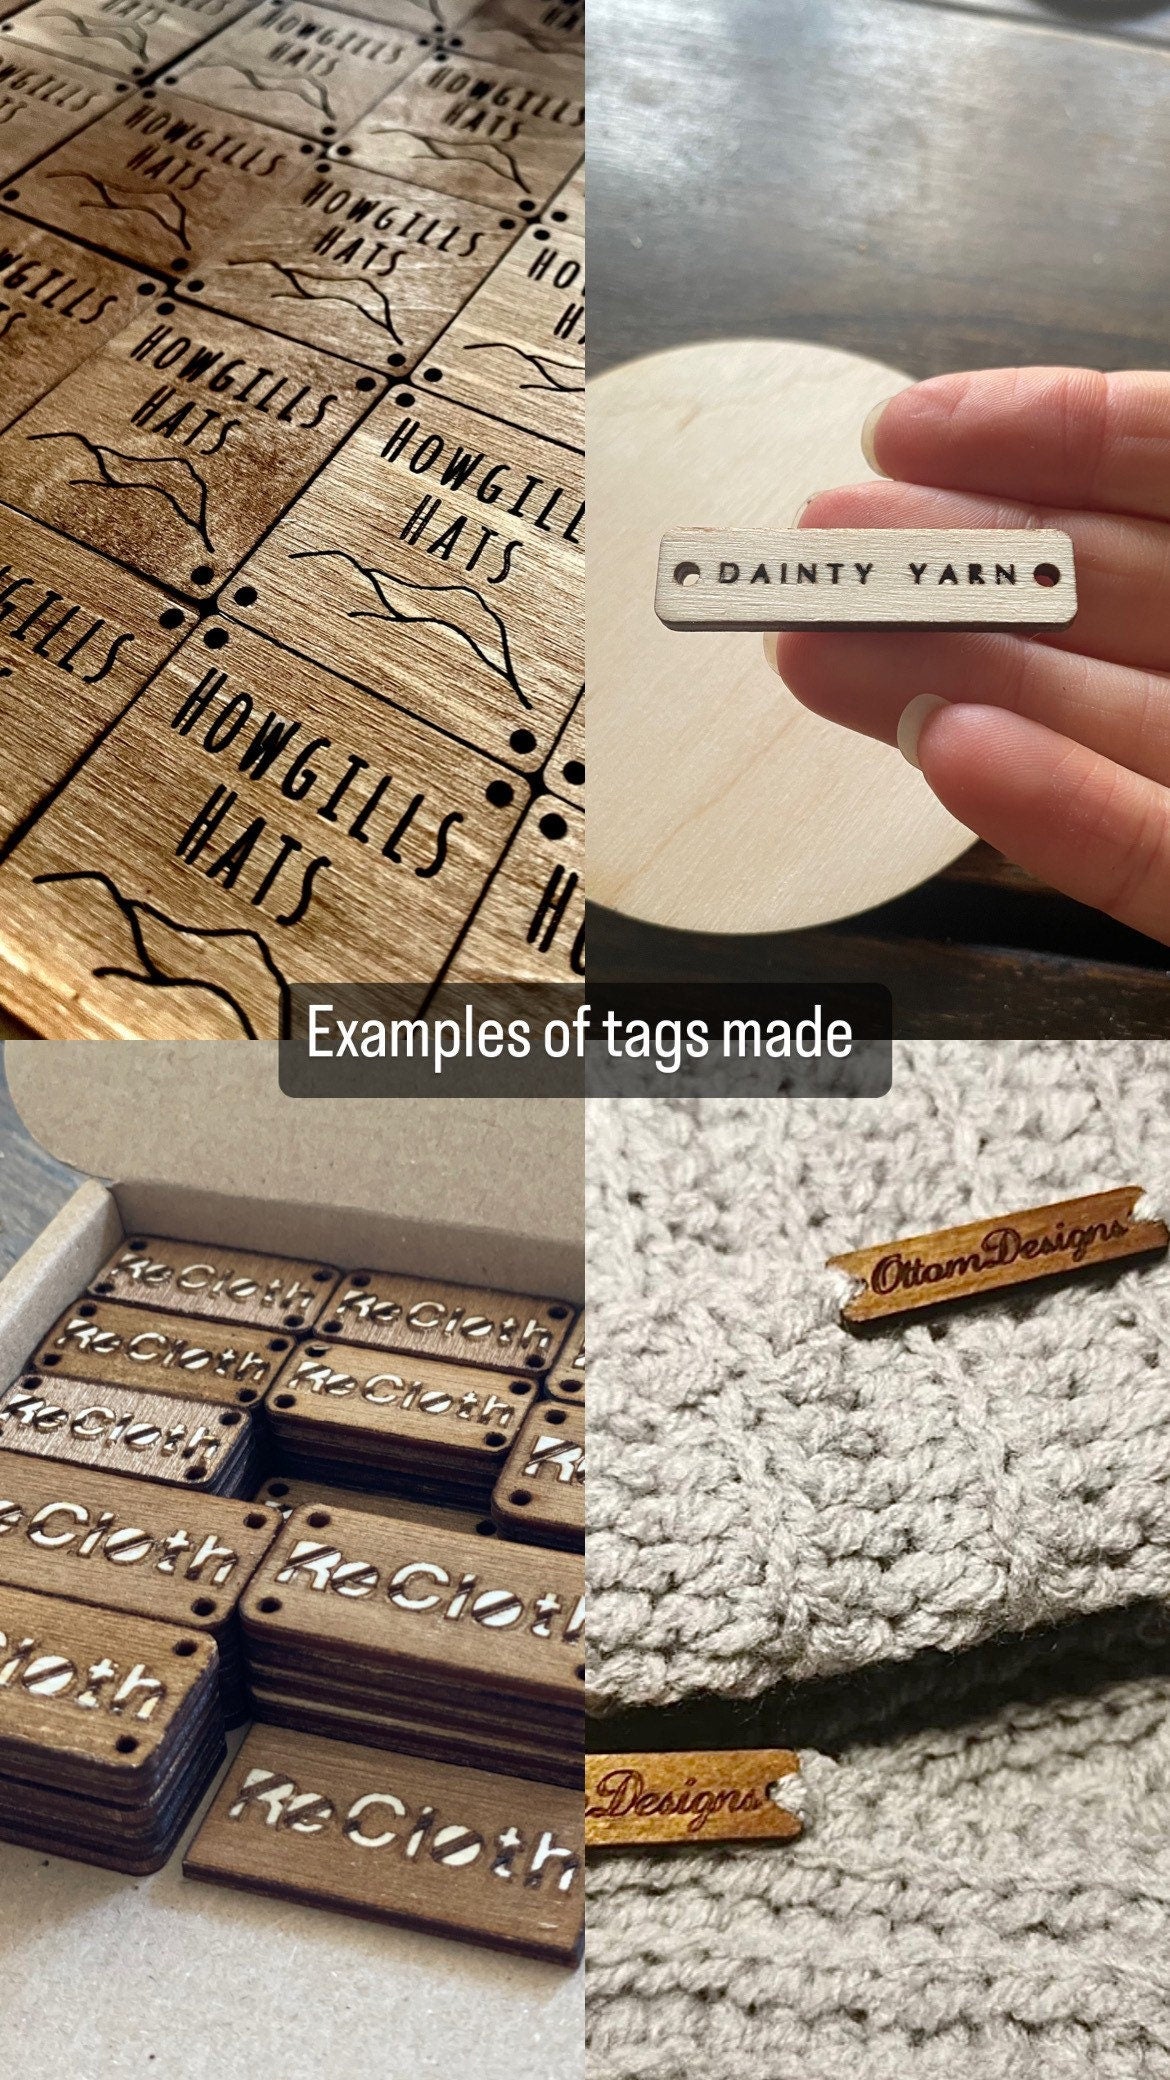 50x30mm Crochet Tags / Knitting Tags | Clothing Tags Custom or Knitting Accessories | Wooden Tags / Personalized Label Tags